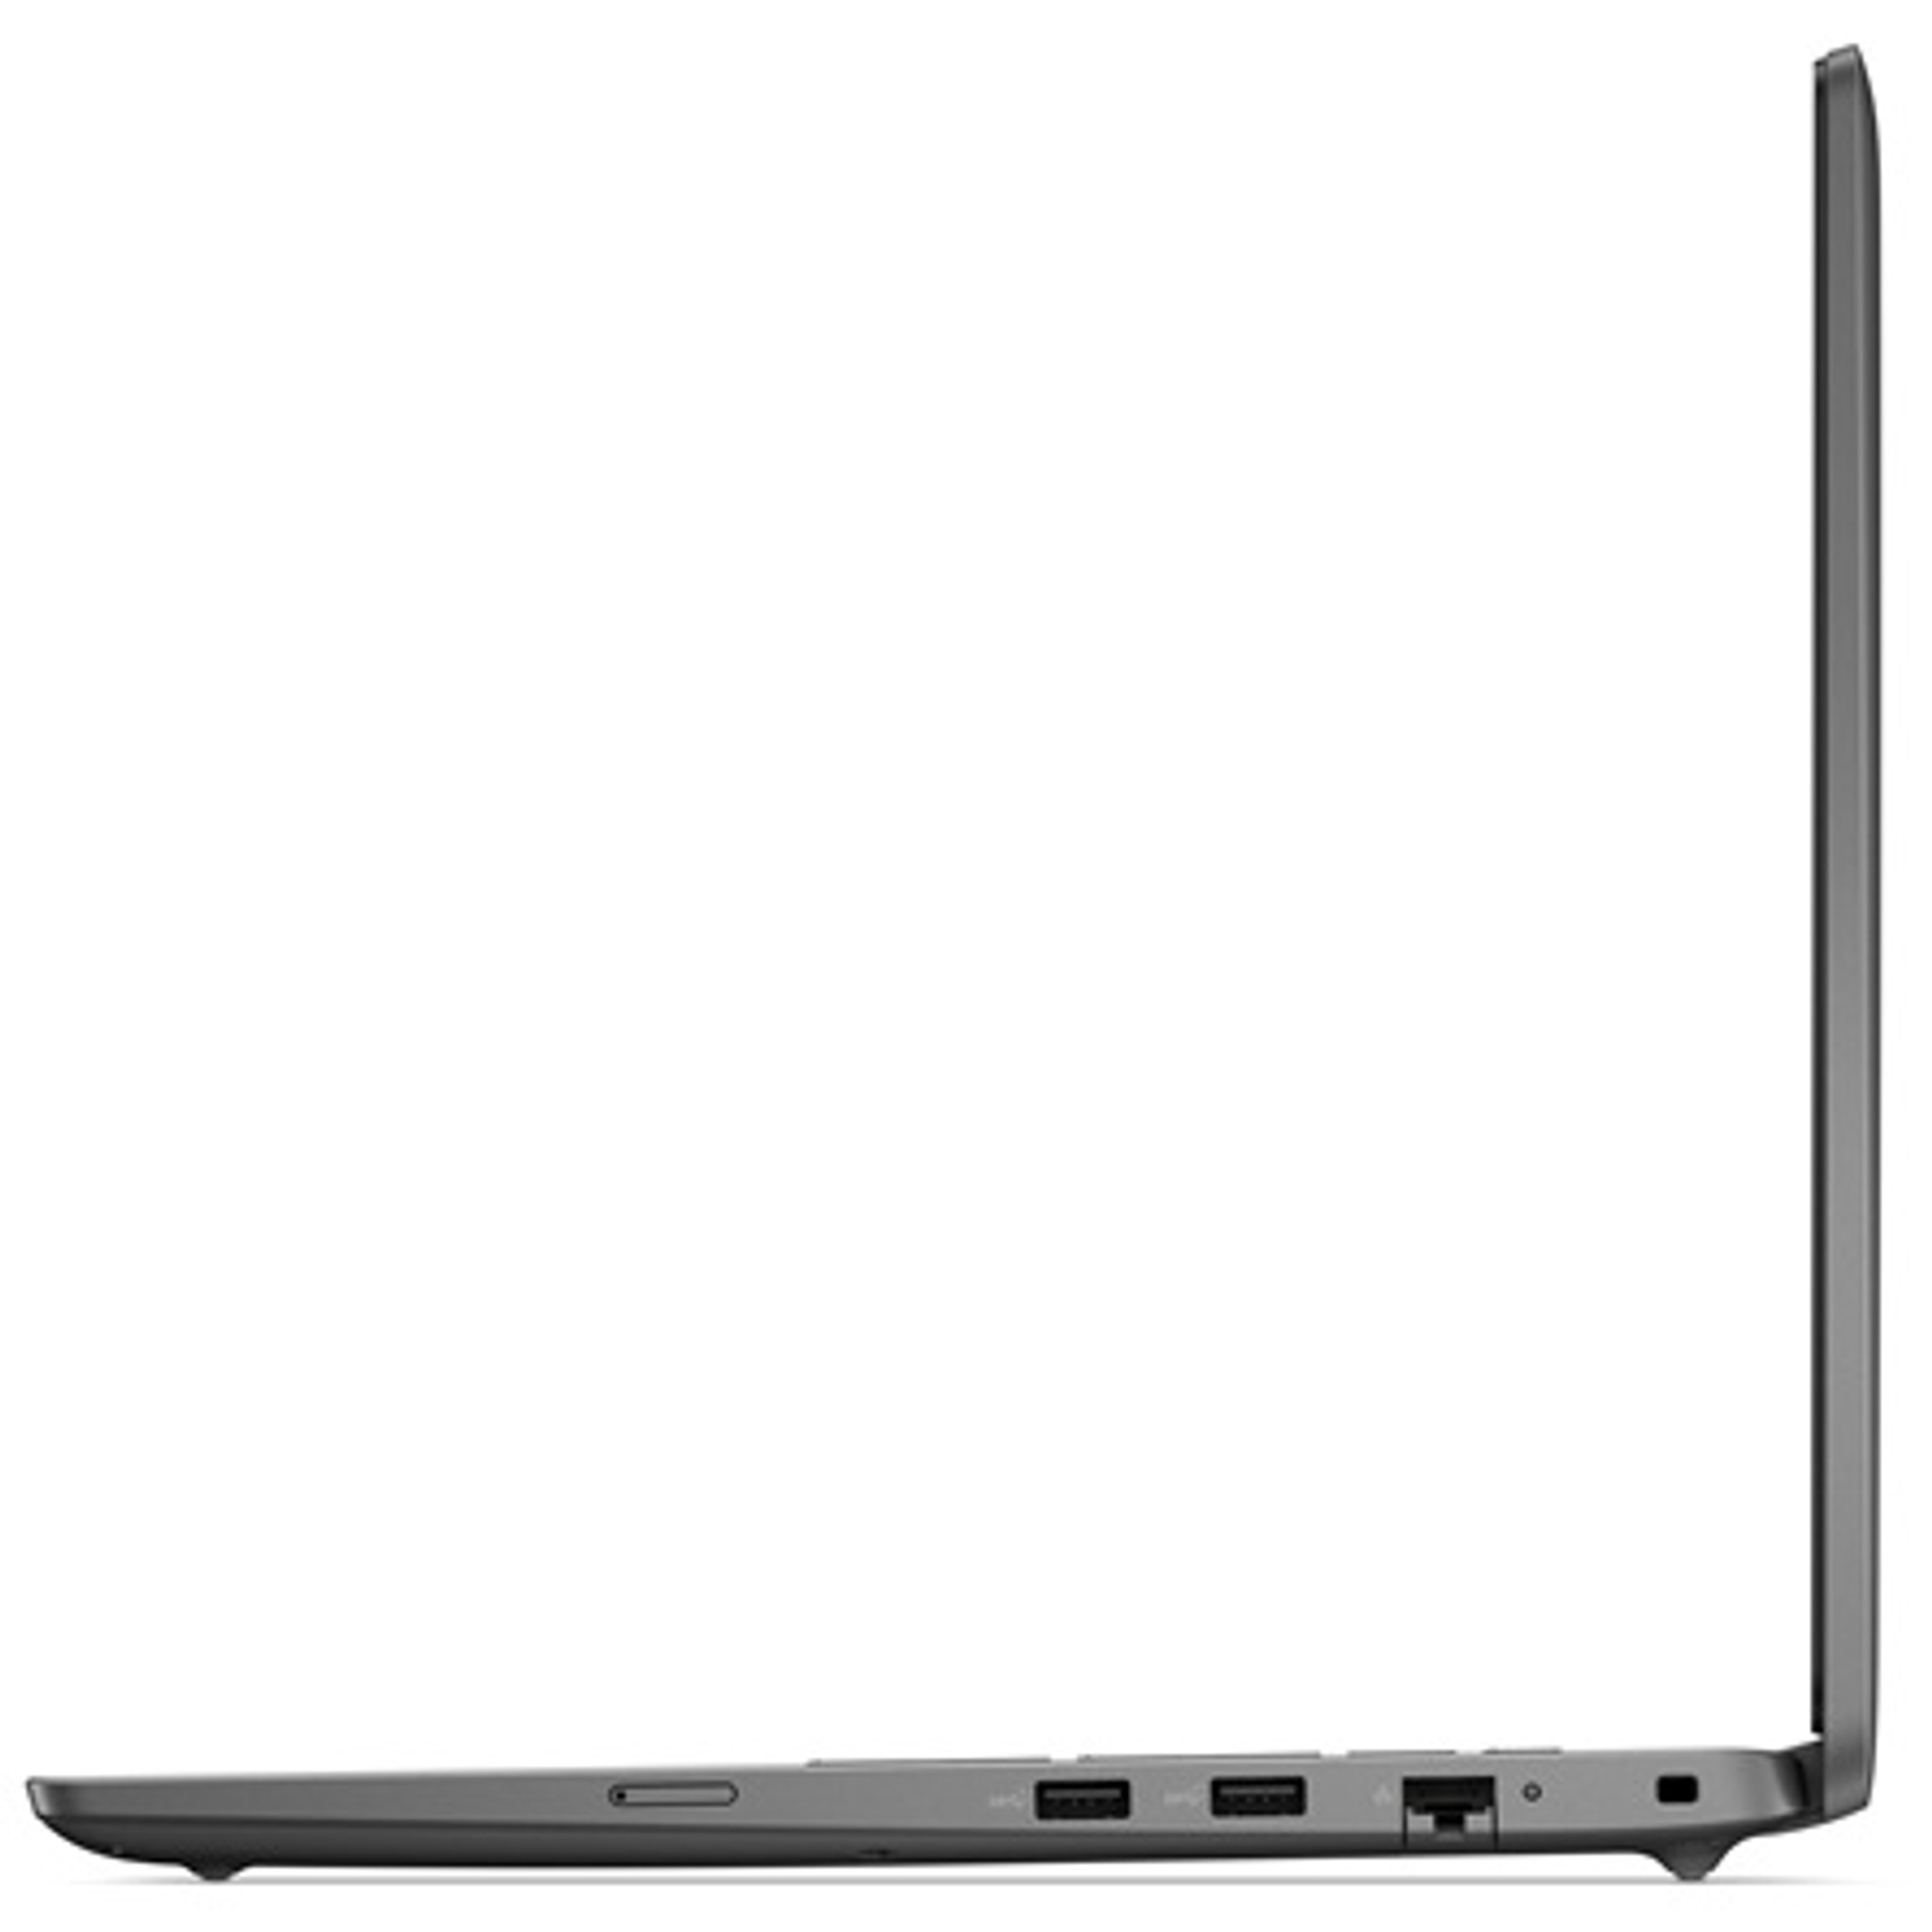 DELL L3540-17 Laptop / Notebook 4